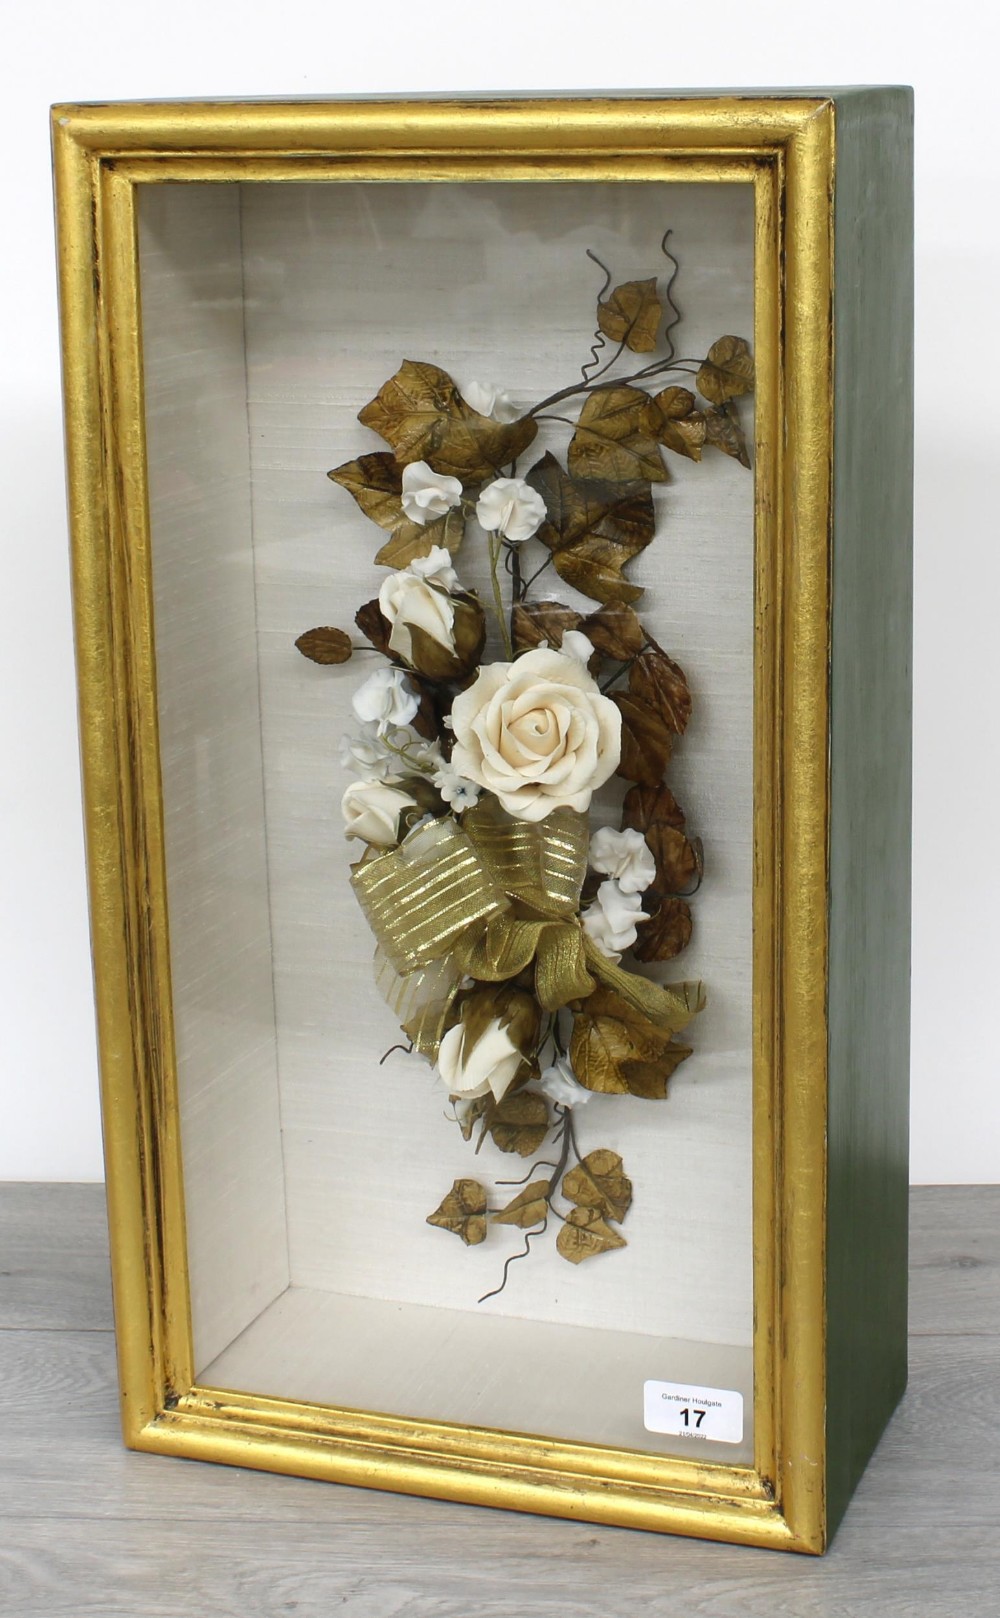 Decorative floral bouquet diorama, within a glazed box frame, 11" wide, 6" deep, 20.5" high